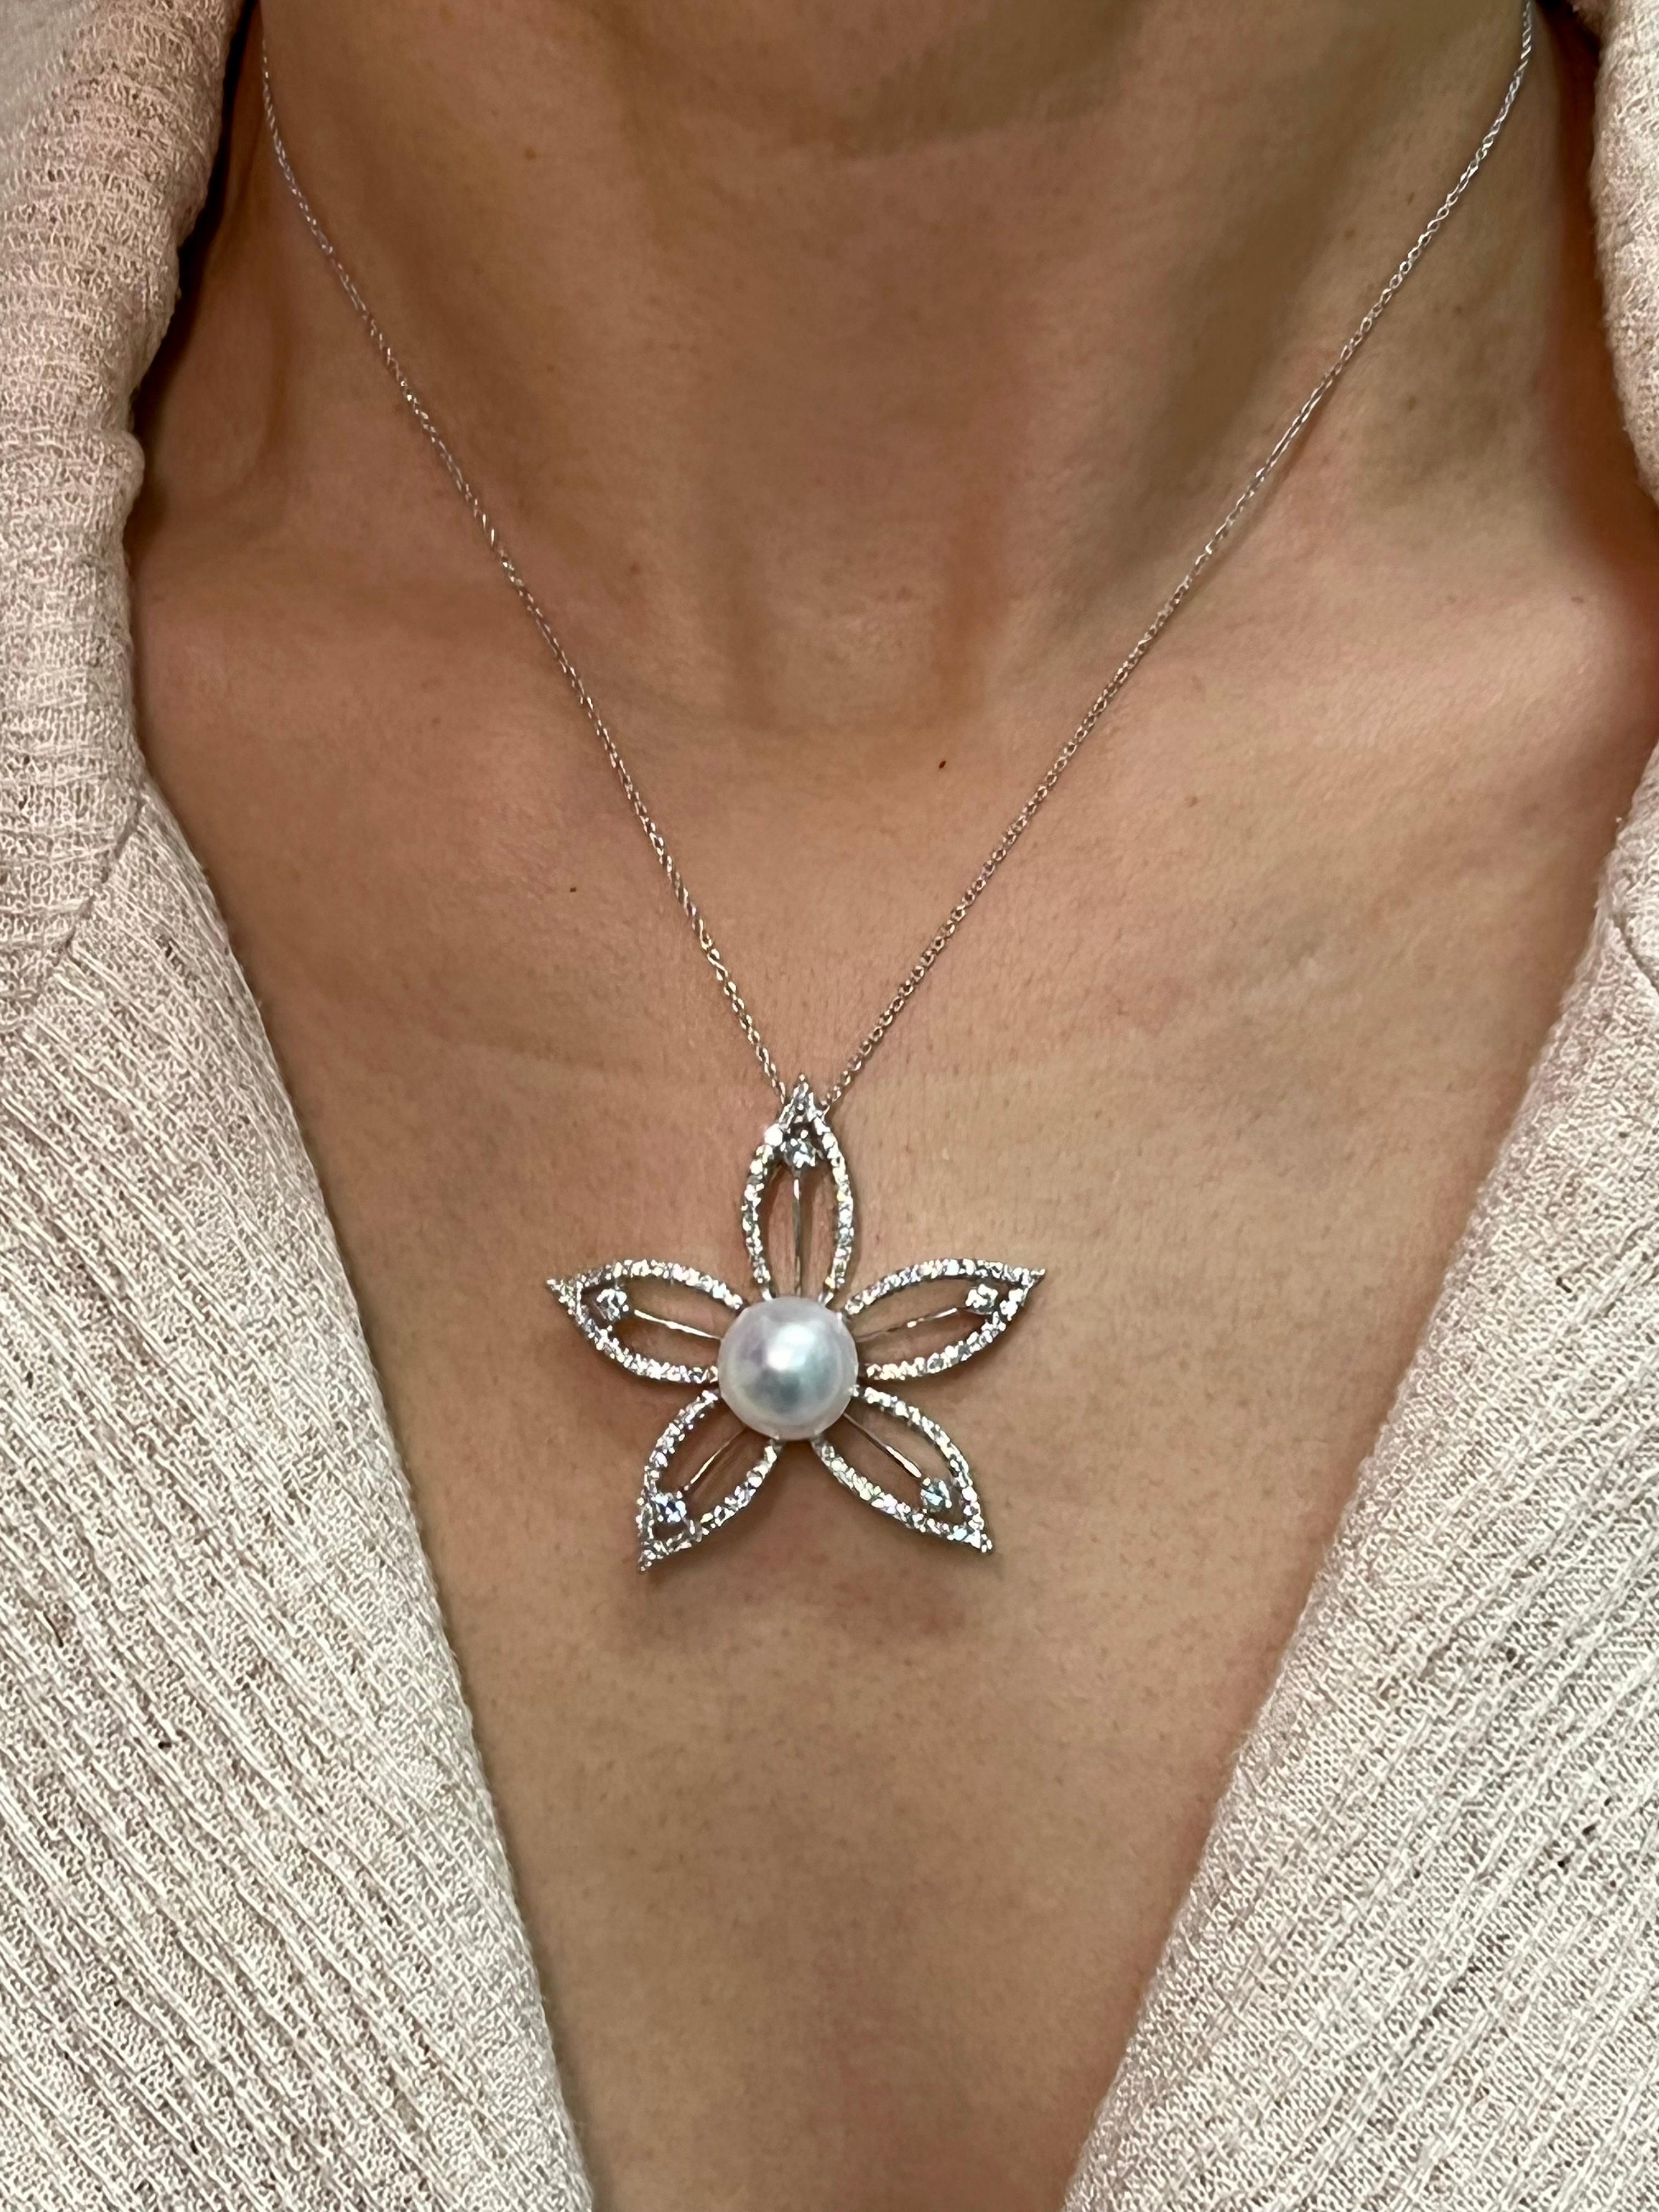 Please check out the HD video. This classic pendant has a classic flower / star design. It looks good dressed up or down. The pendant is about 4cm x 4cm. This pendant is 18k white gold set with one freshwater pearl about 10.5mm in size. There are 5